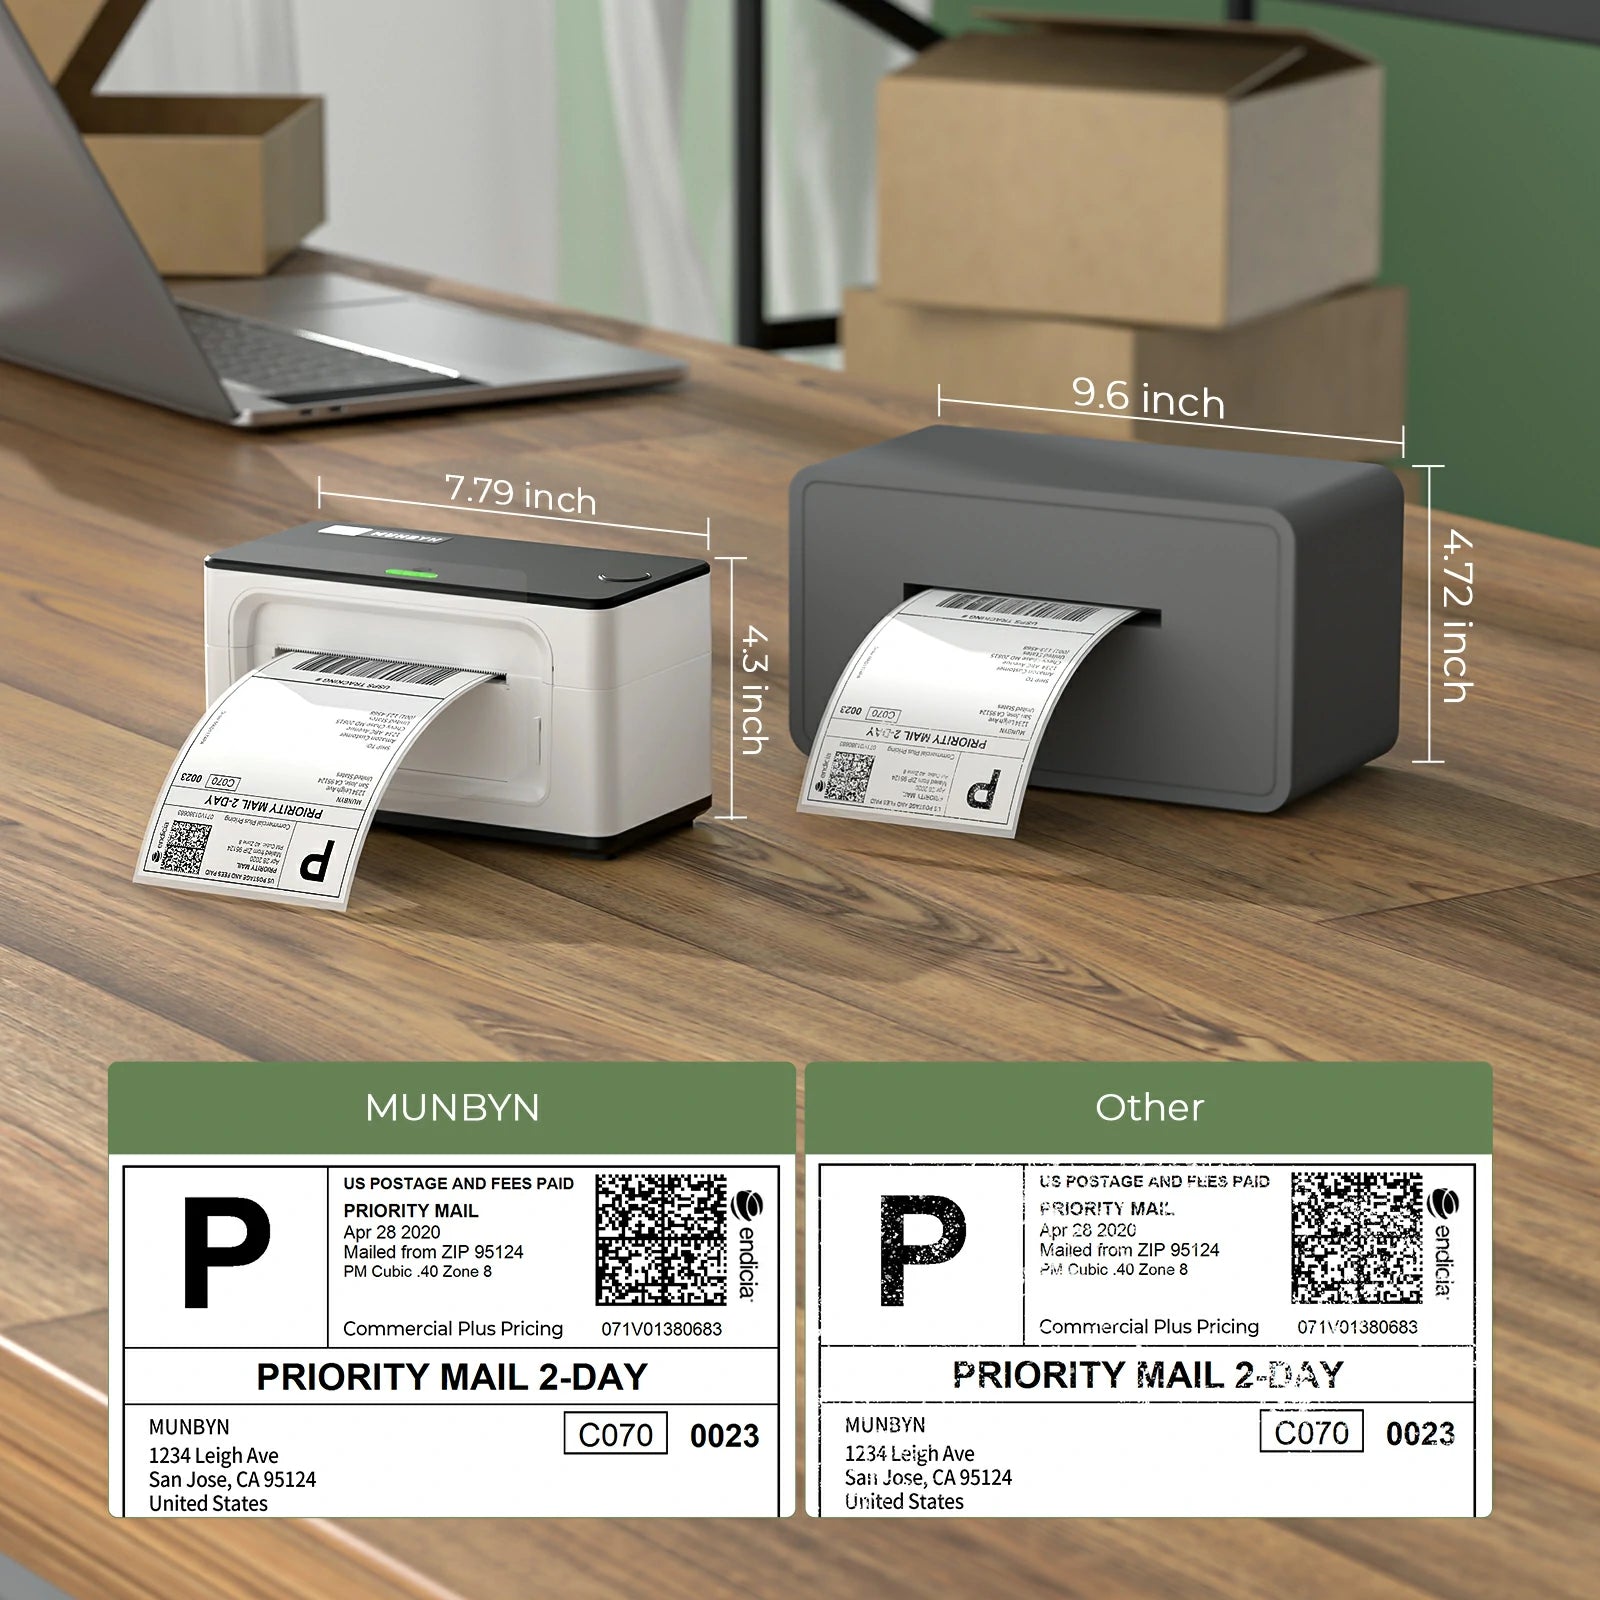 Munbyn ITPP941 4×6 thermal printer review - Prepare ye all for Boxing Day!  - The Gadgeteer